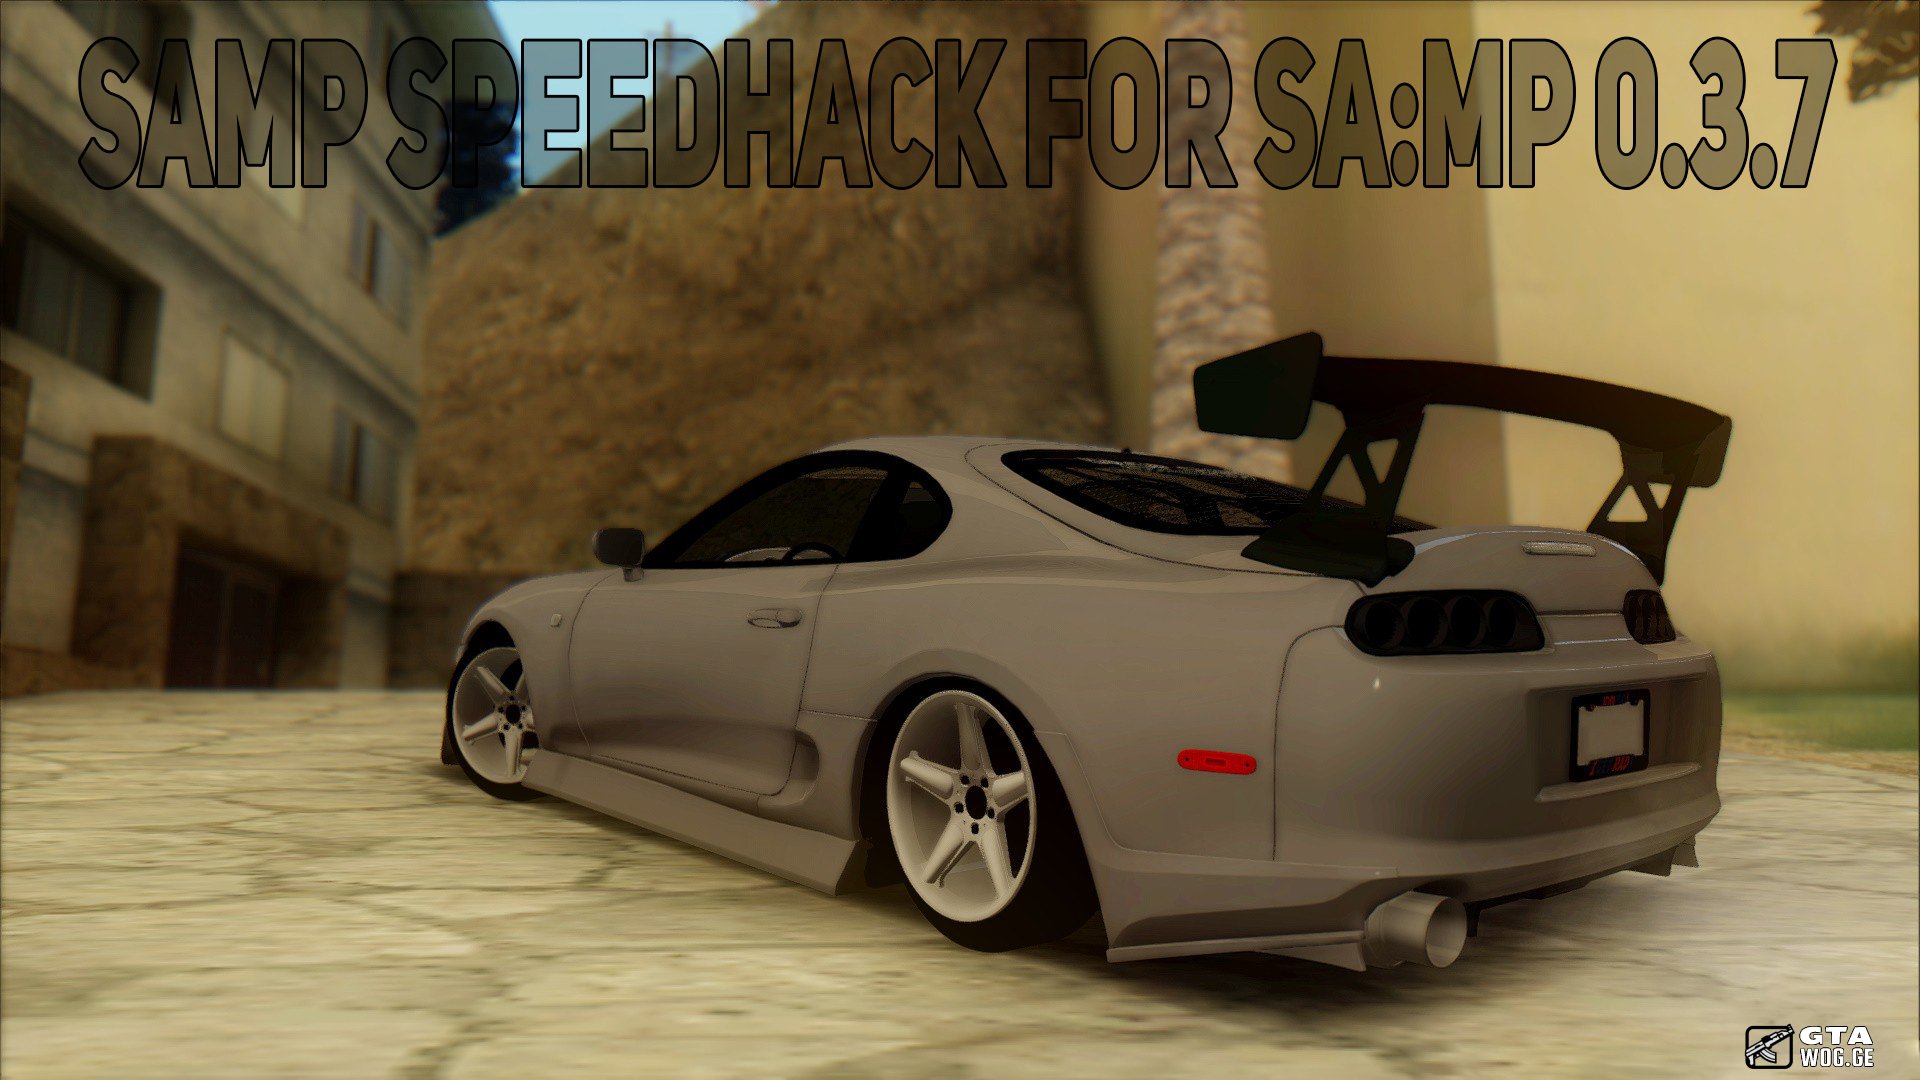 [Cheat] SpeedHack For SA:MP 0.3.7